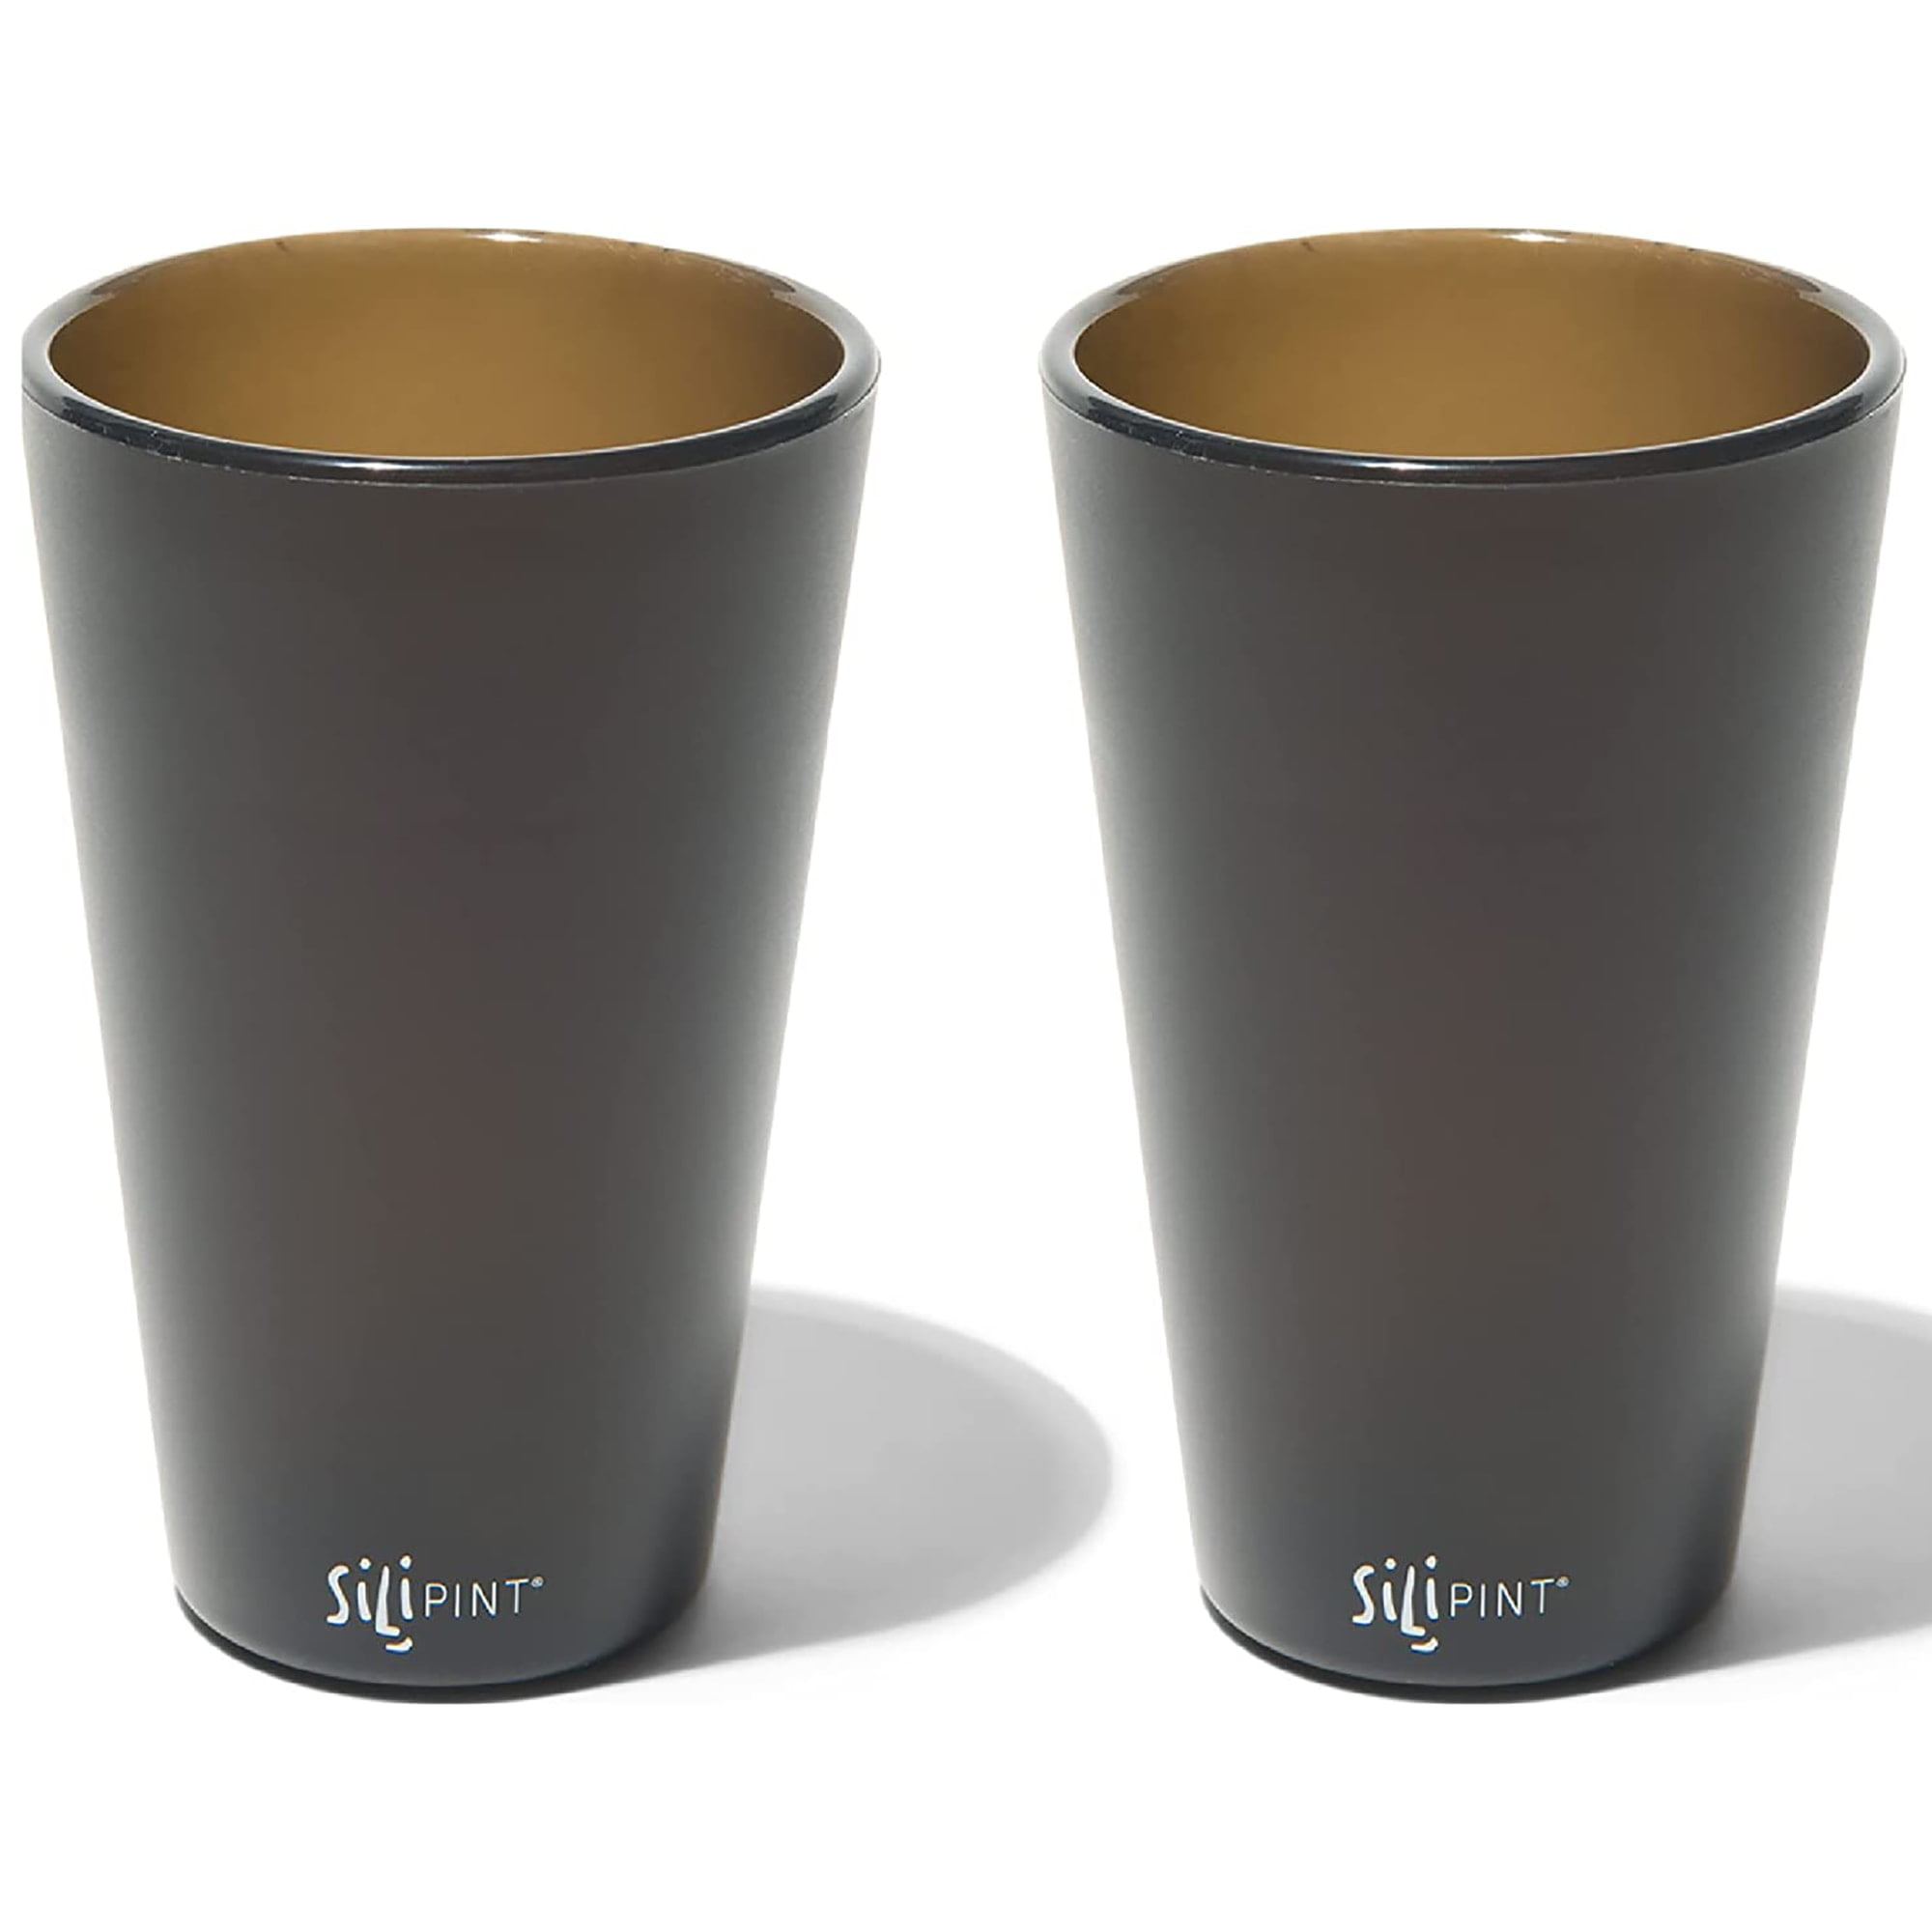 Silipint: Silicone 16oz Coffee Tumblers: 2 Pack Blue Speckled - Unbreakable Cups, Reusable, Flexible, Hot & Cold Drinks